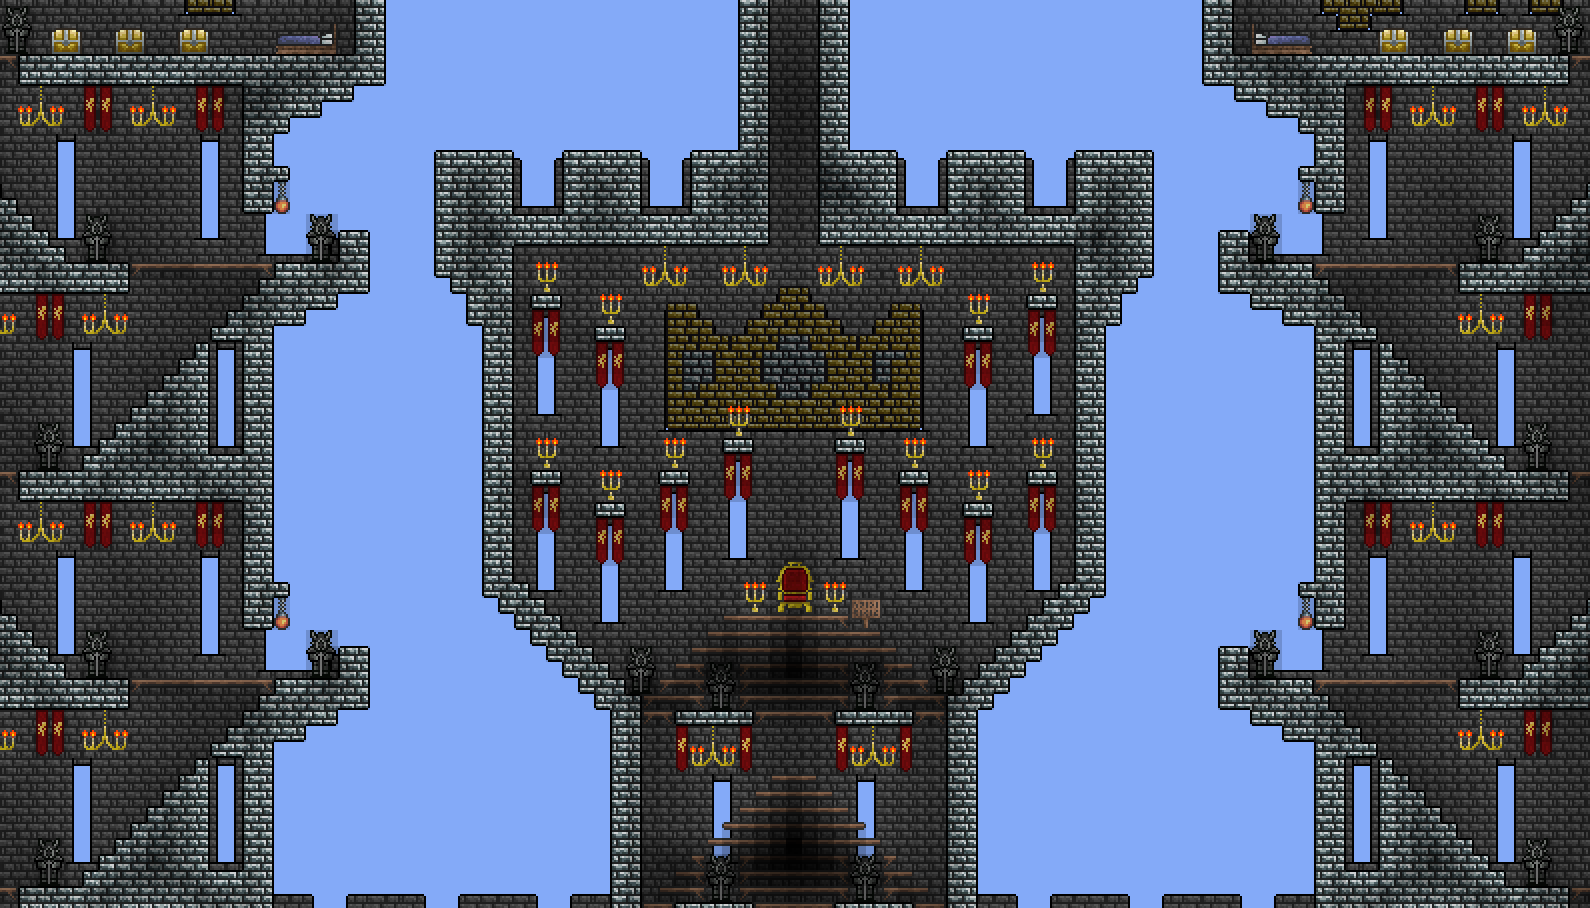 Updates and map for those who asked for a download to my personal endgame  castle! (link in post) : r/Terraria